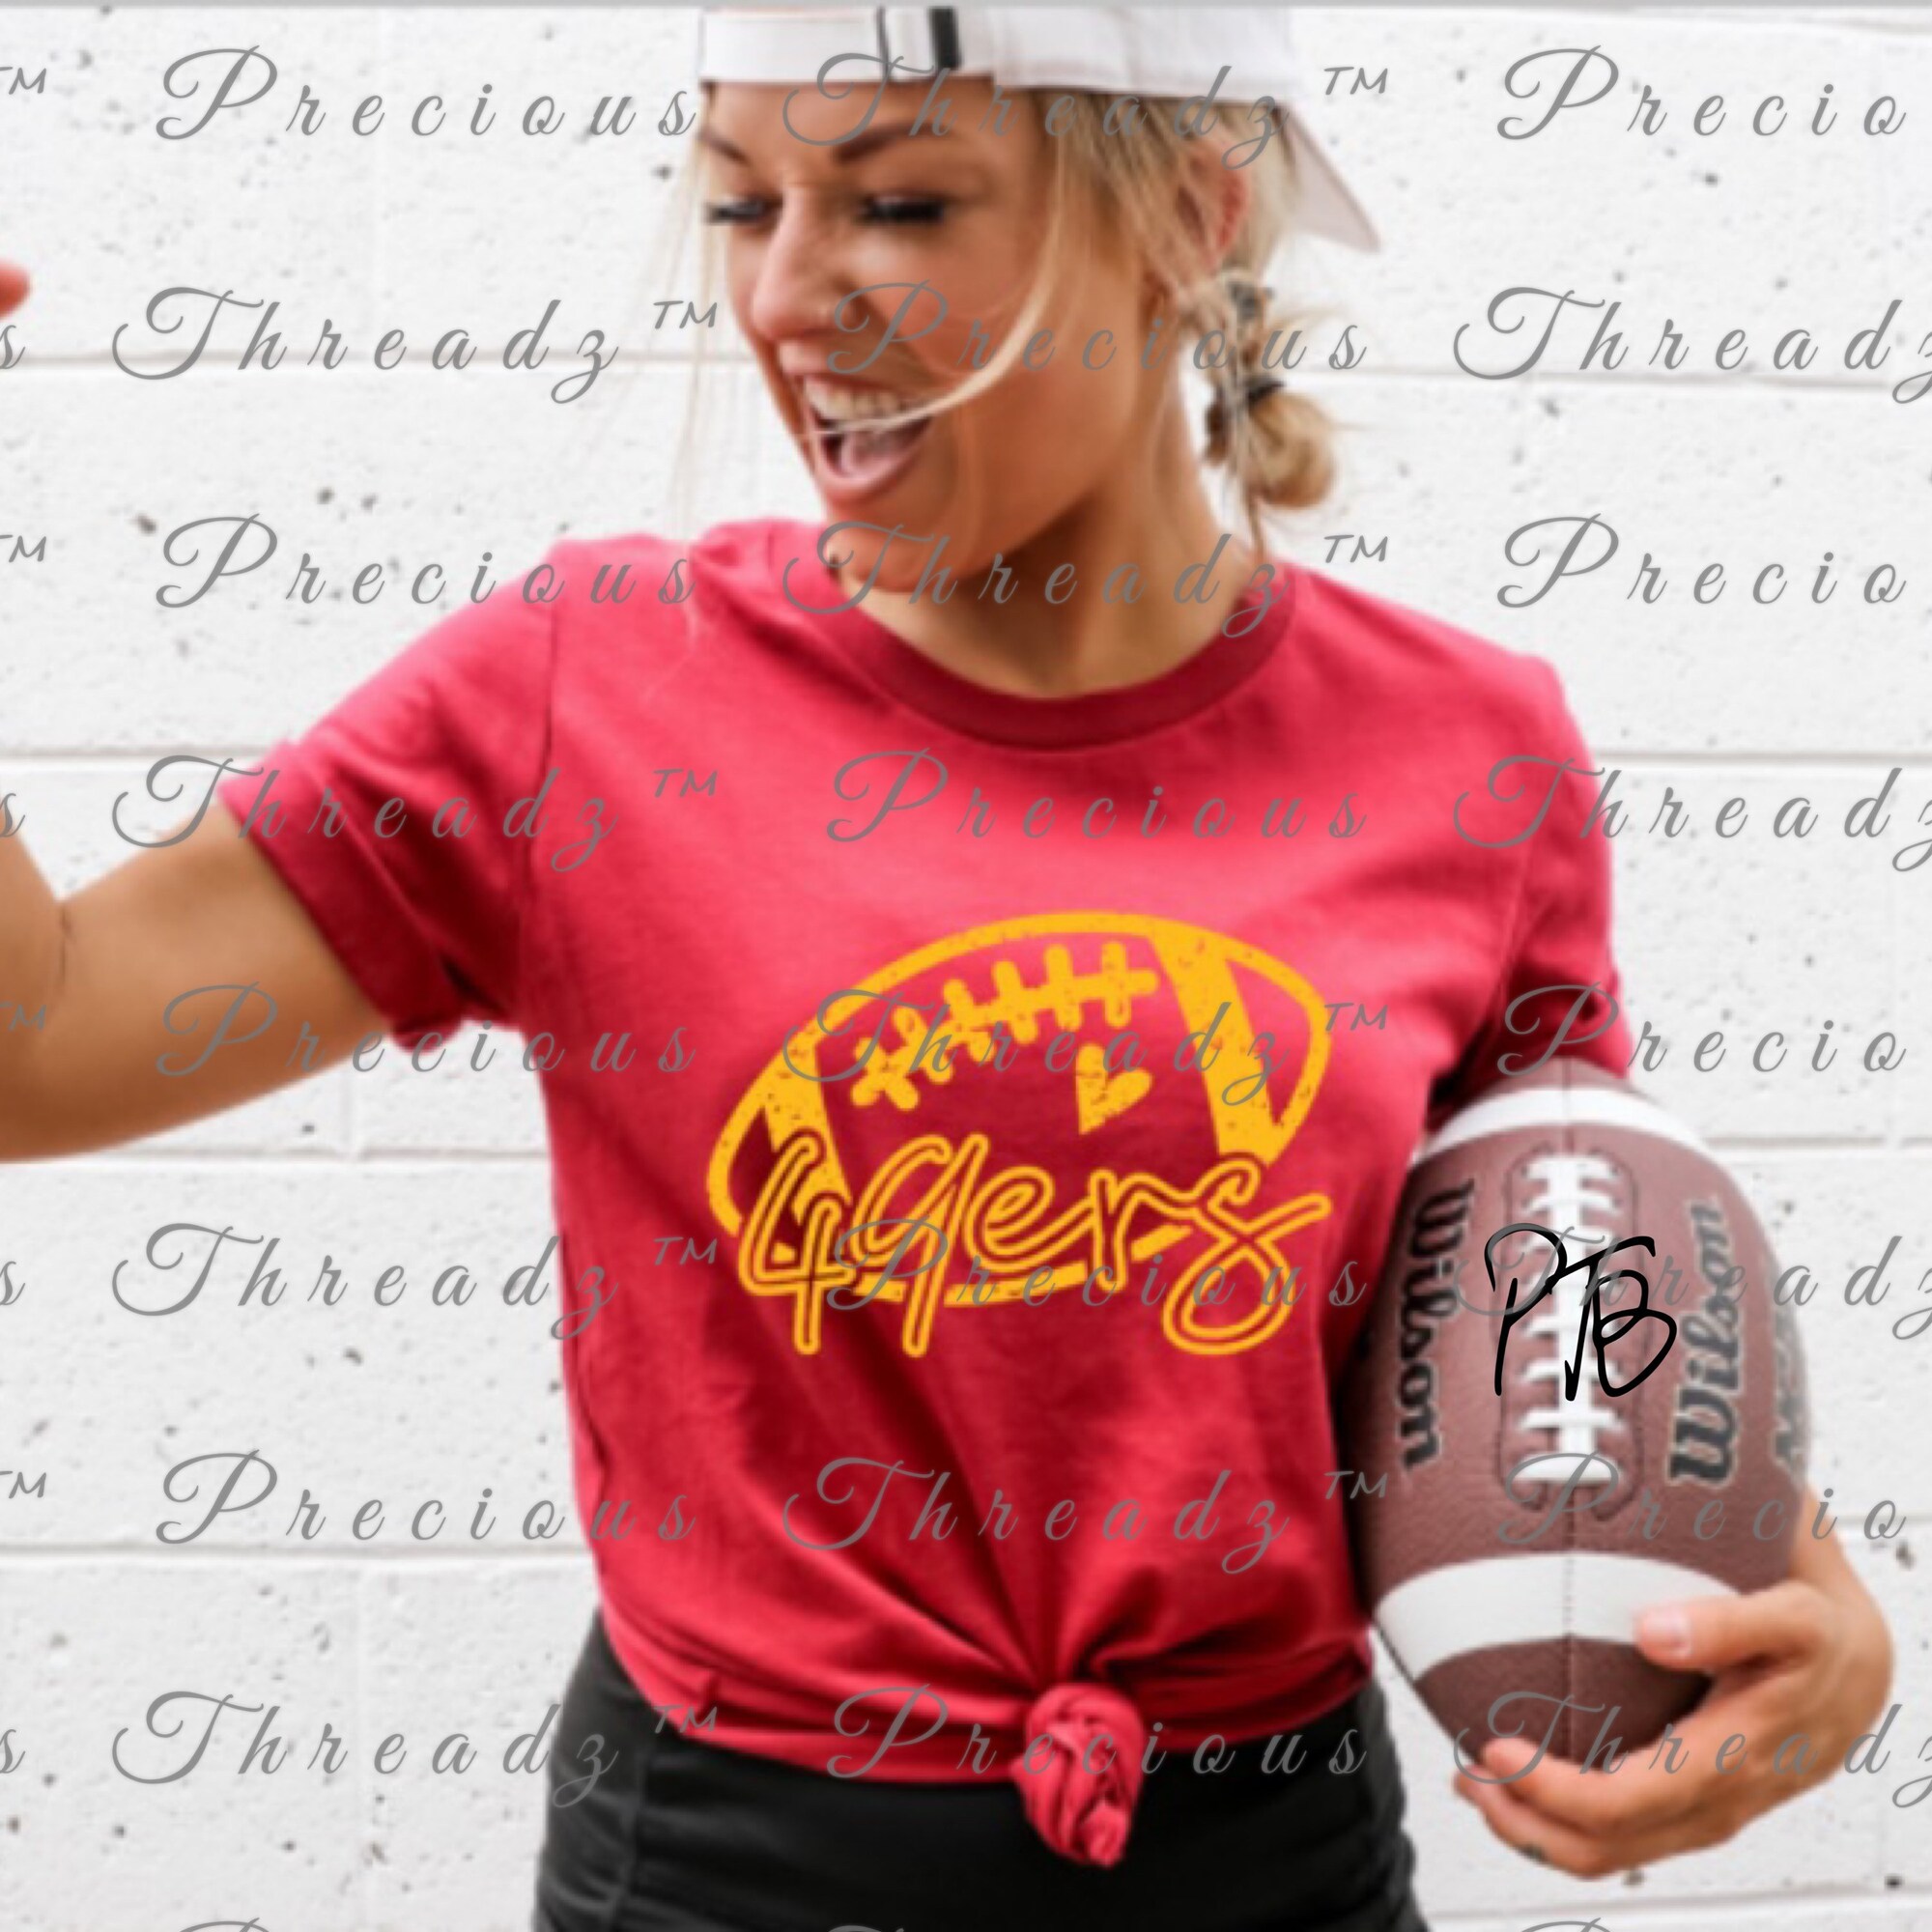 Discover 49ers Football, Grunge, Football, Forty Niners tshirts